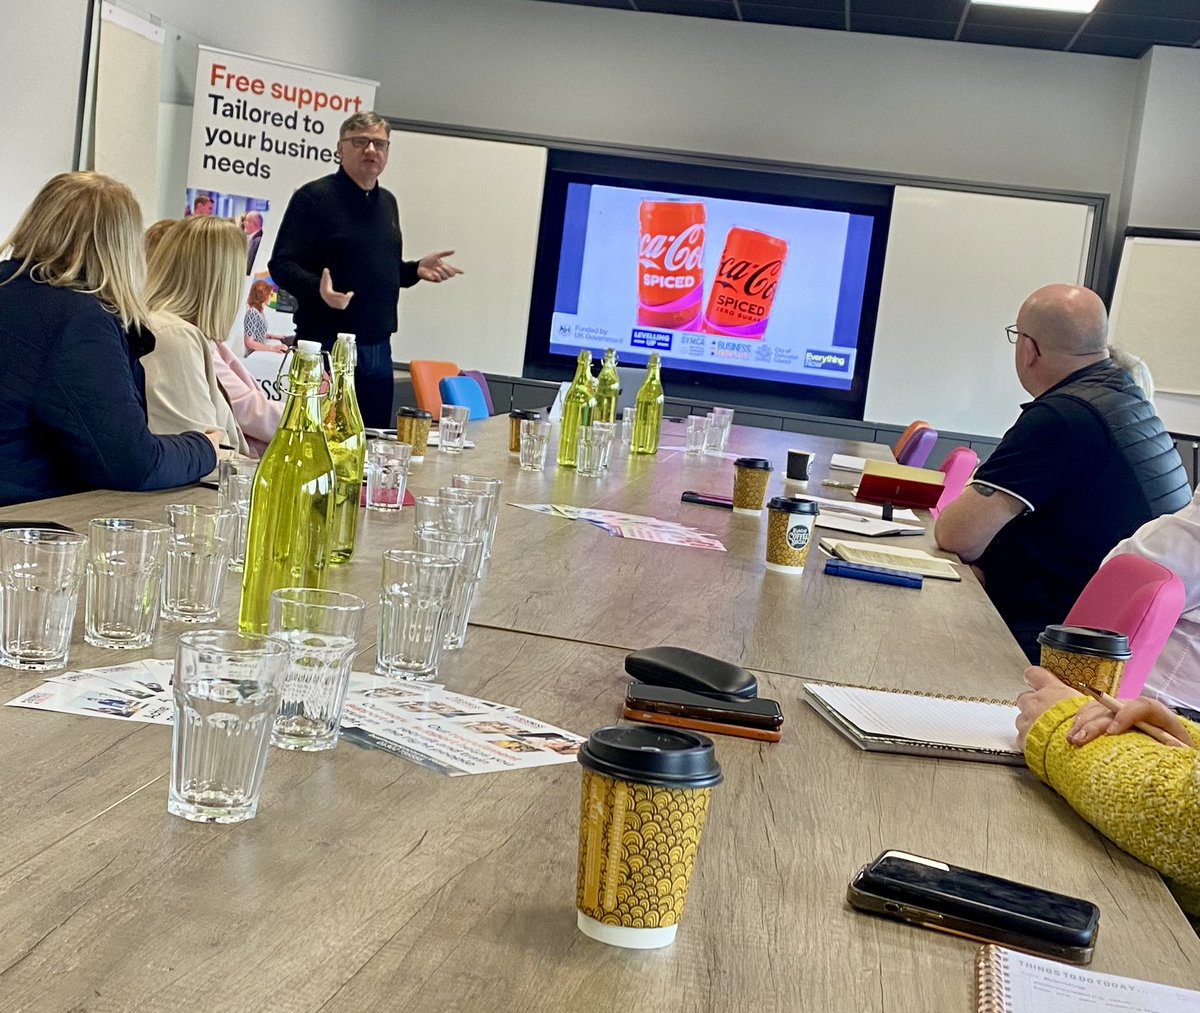 Loving the masterclass this morning…branding & marketing is such an interesting topic and one that affects us all #doncasterisgreat #businesssuccessess @MyDoncaster @SouthYorksMCA